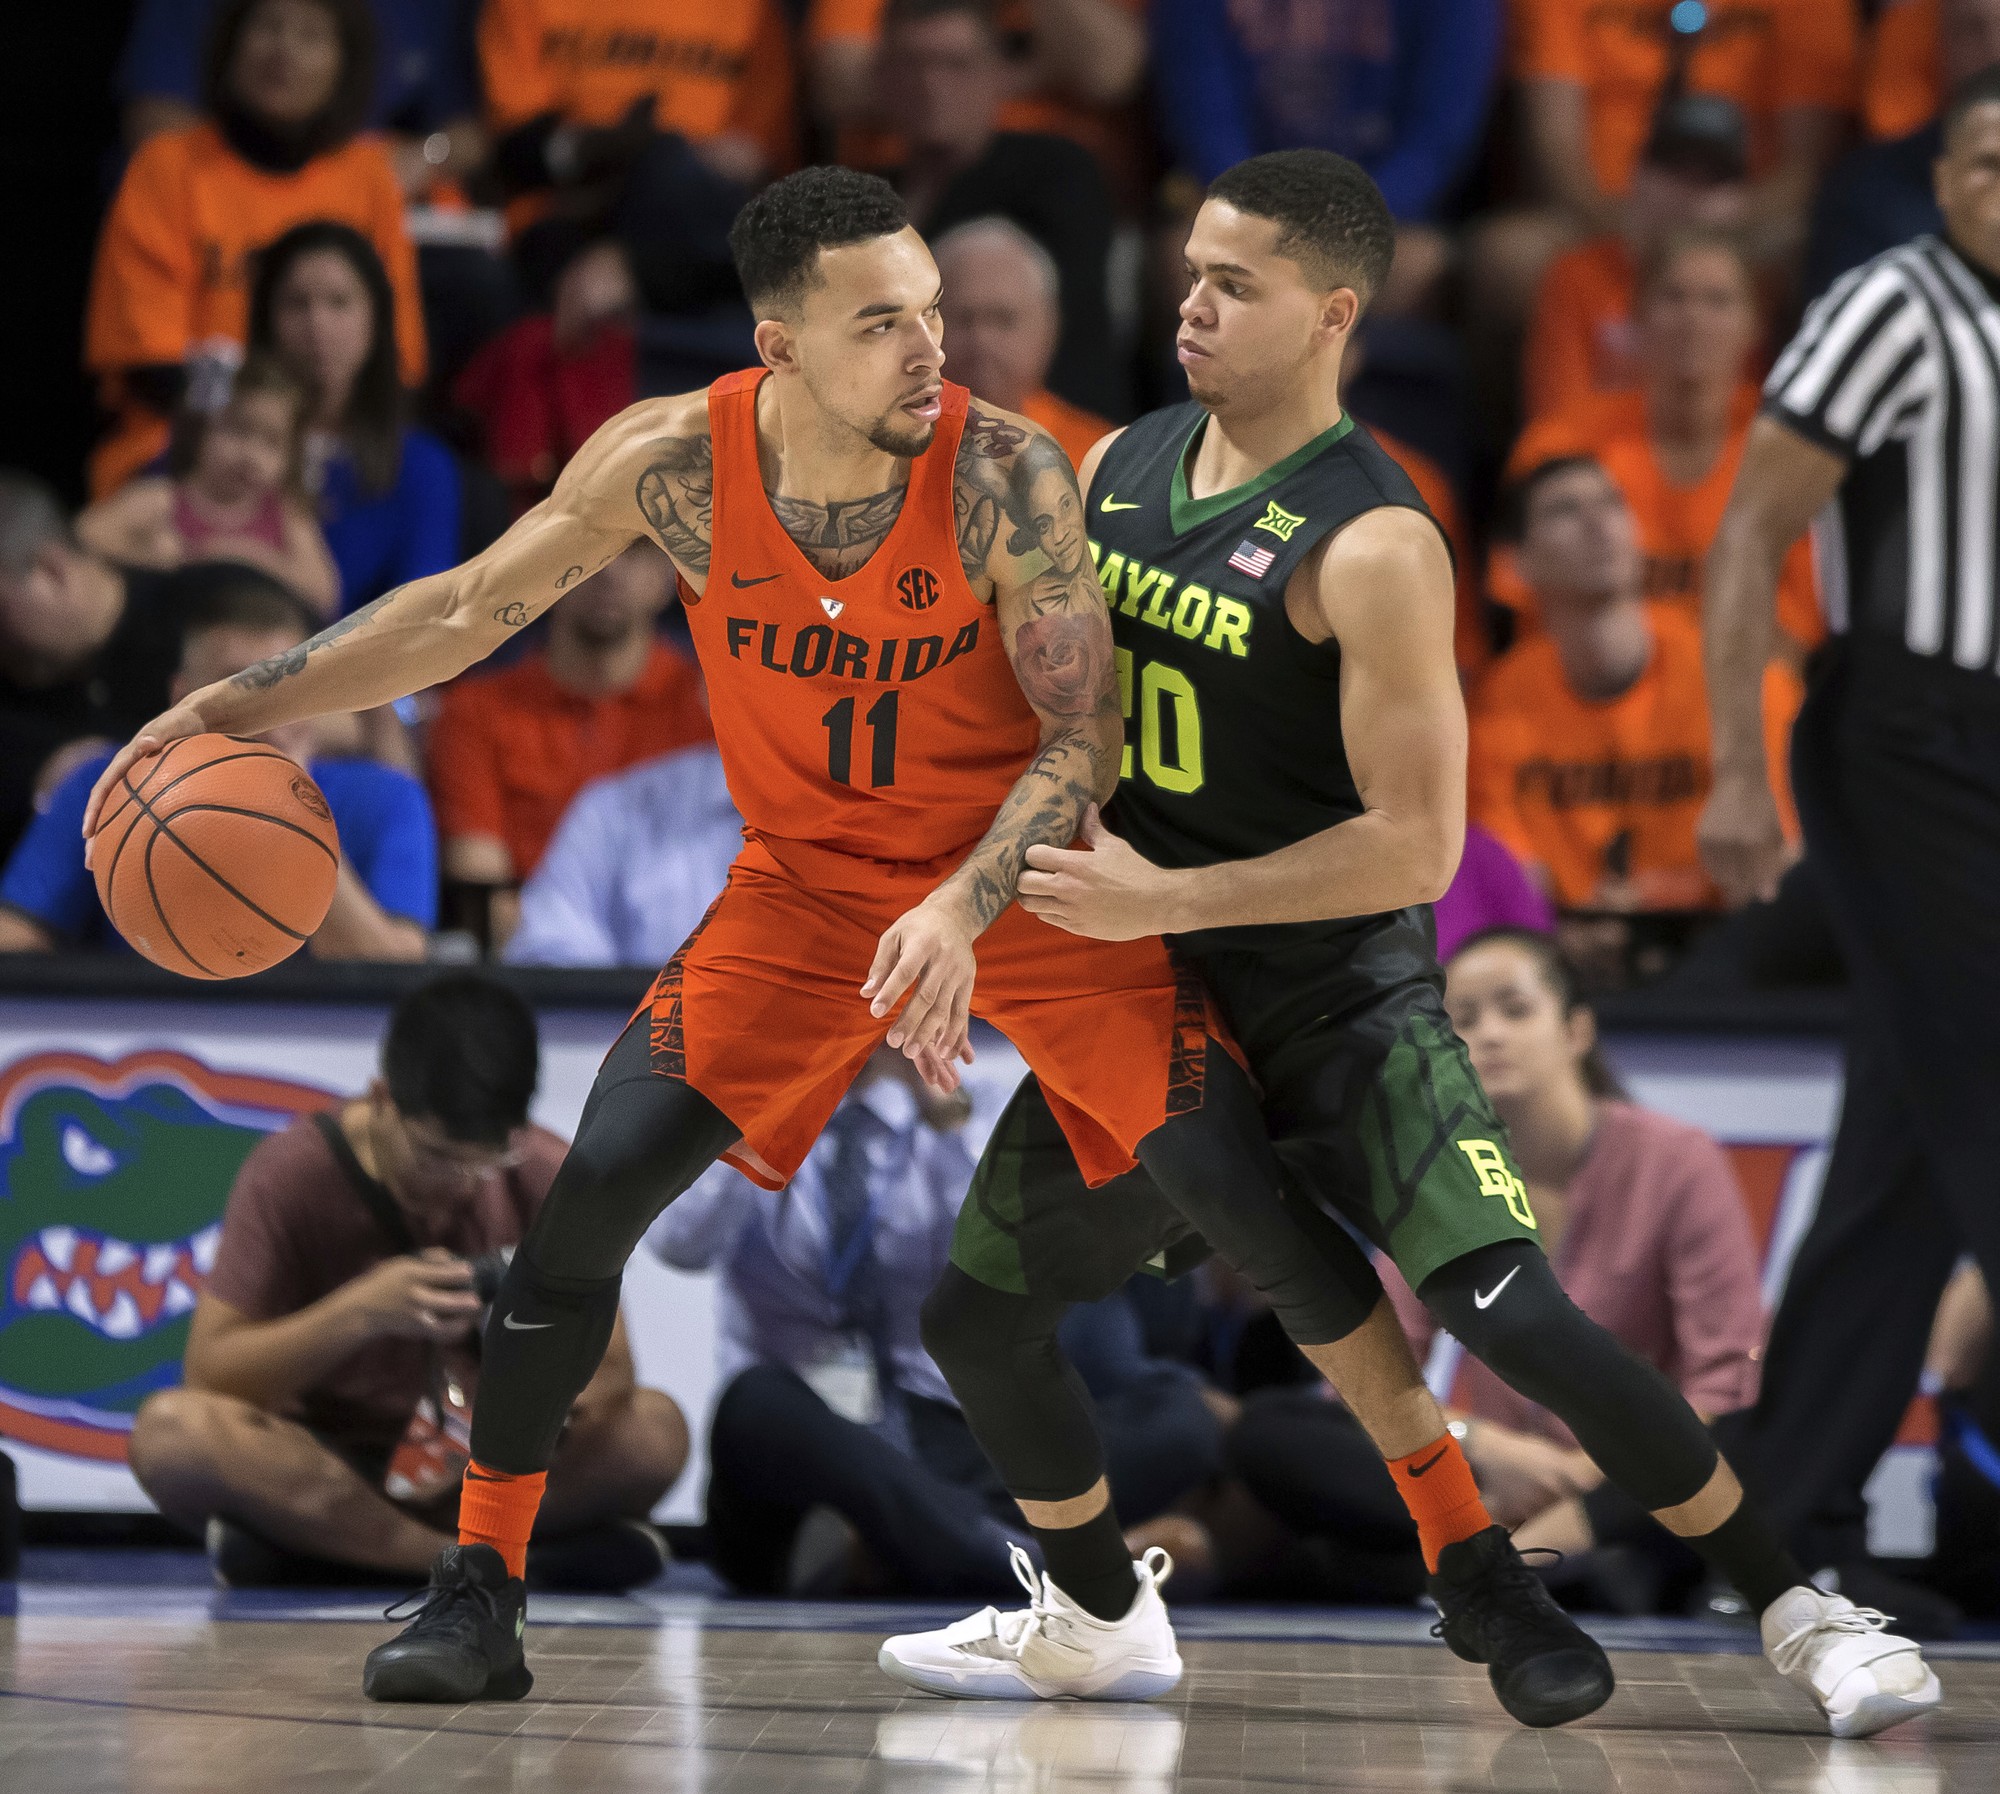 Gators torch Bears in Big 12/SEC Challenge | The Baylor Lariat2000 x 1794